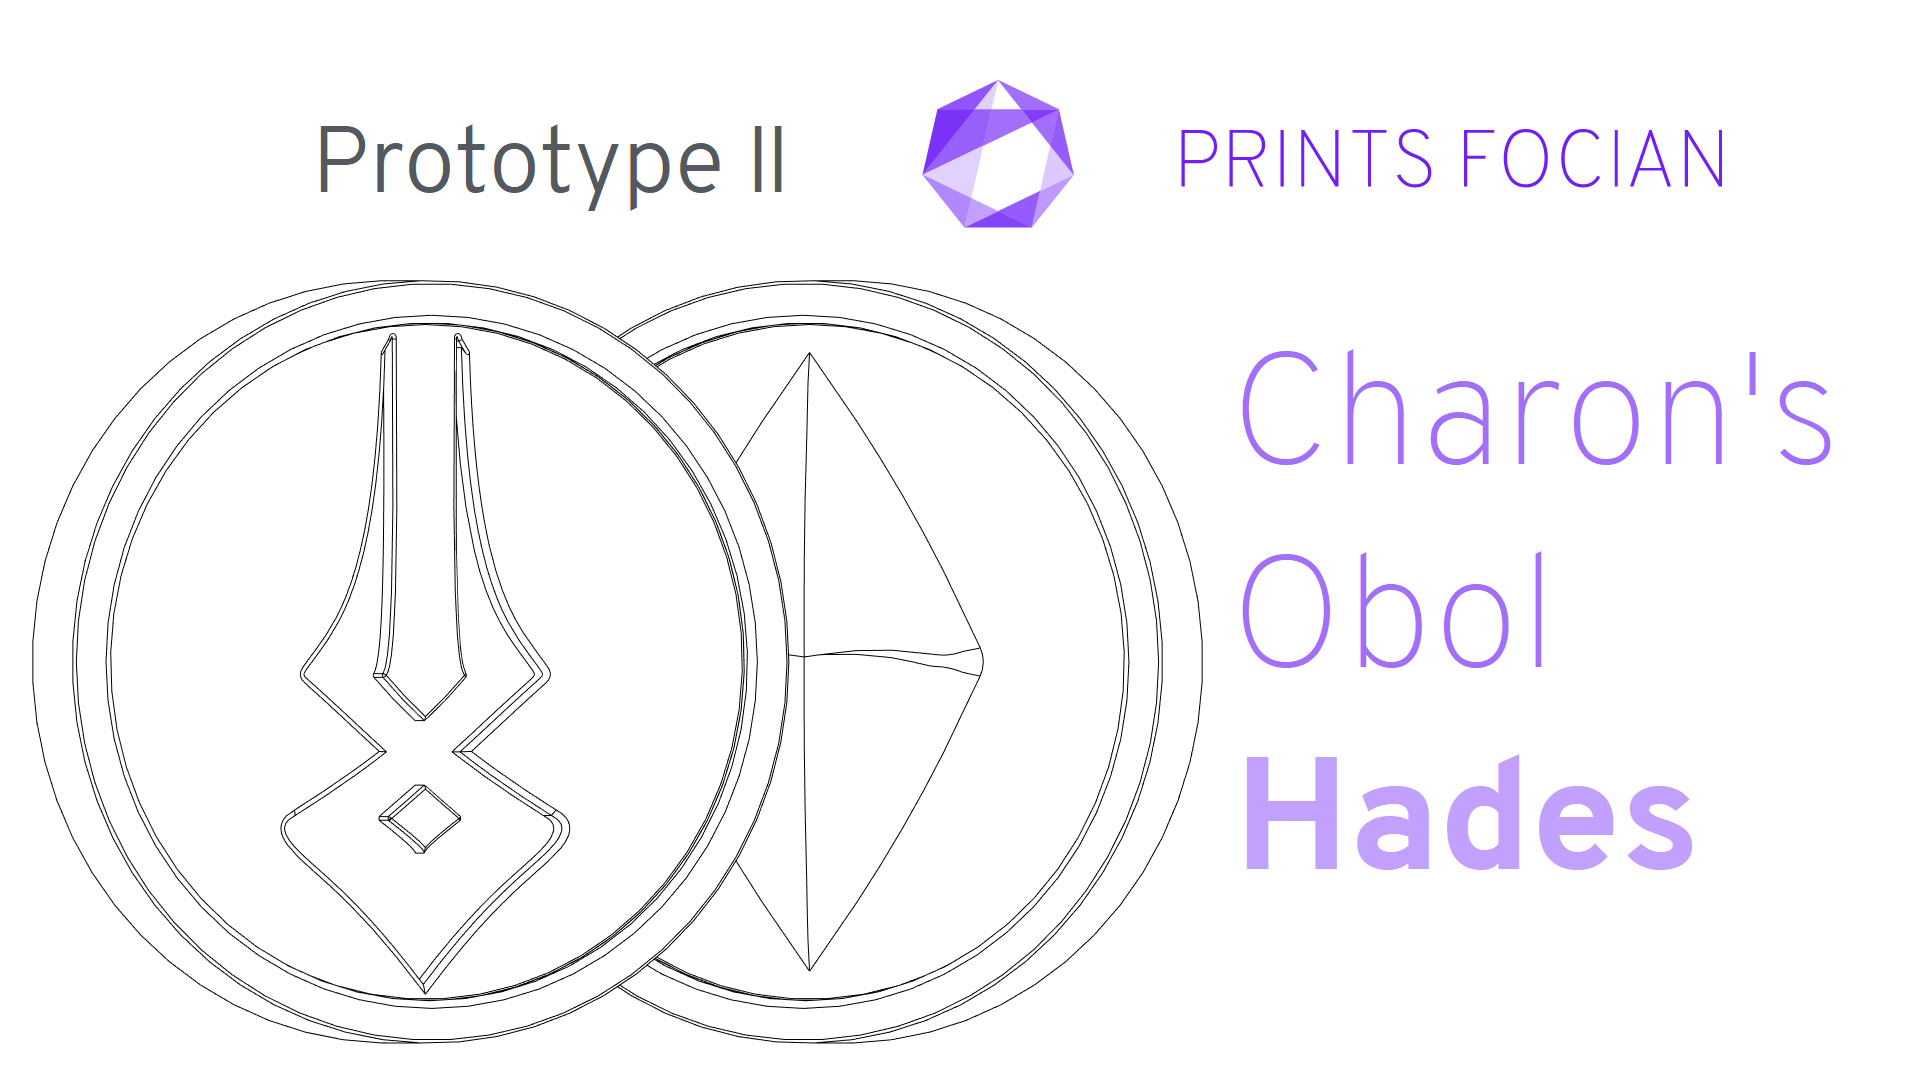 Wireframe image of Charon's Obol on a white background. Prints Focian Icon top and central. Text: Purple Prints Focian, Charon's Obol, and Hades. Dark grey text Prototype II